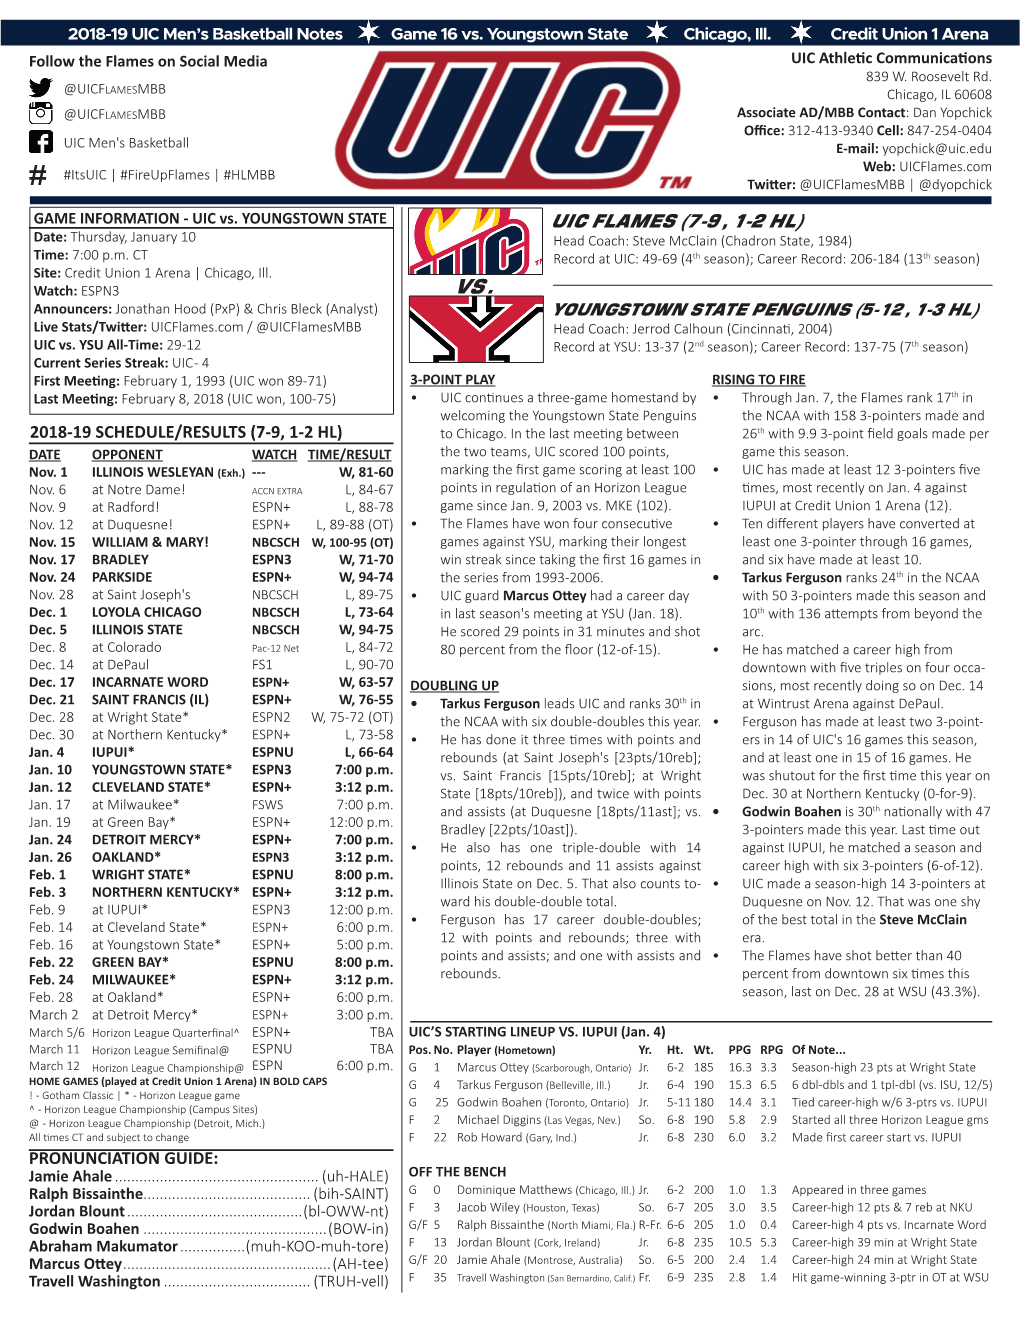 UIC FLAMES (7-9, 1-2 HL) Date: Thursday, January 10 Head Coach: Steve Mcclain (Chadron State, 1984) Time: 7:00 P.M